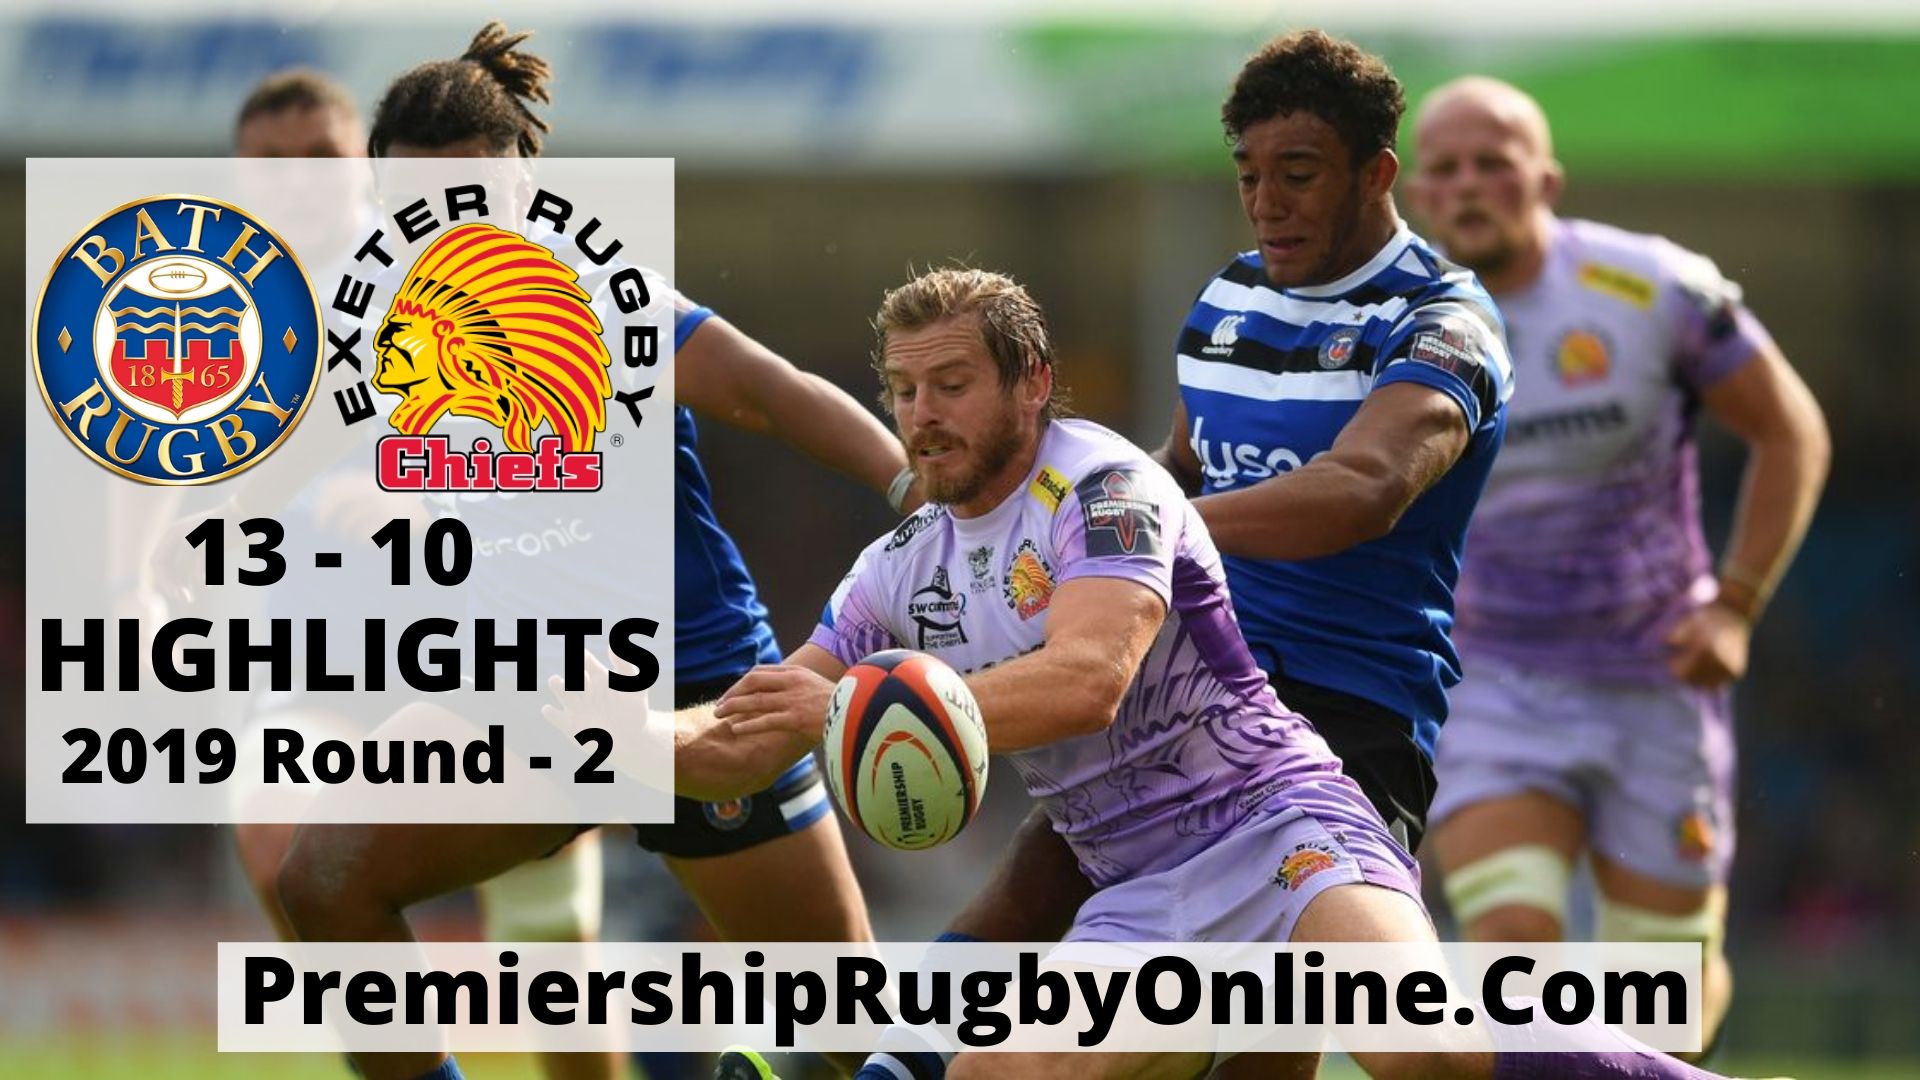 Bath Rugby vs Exeter Chiefs Highlights 2019 Round 2